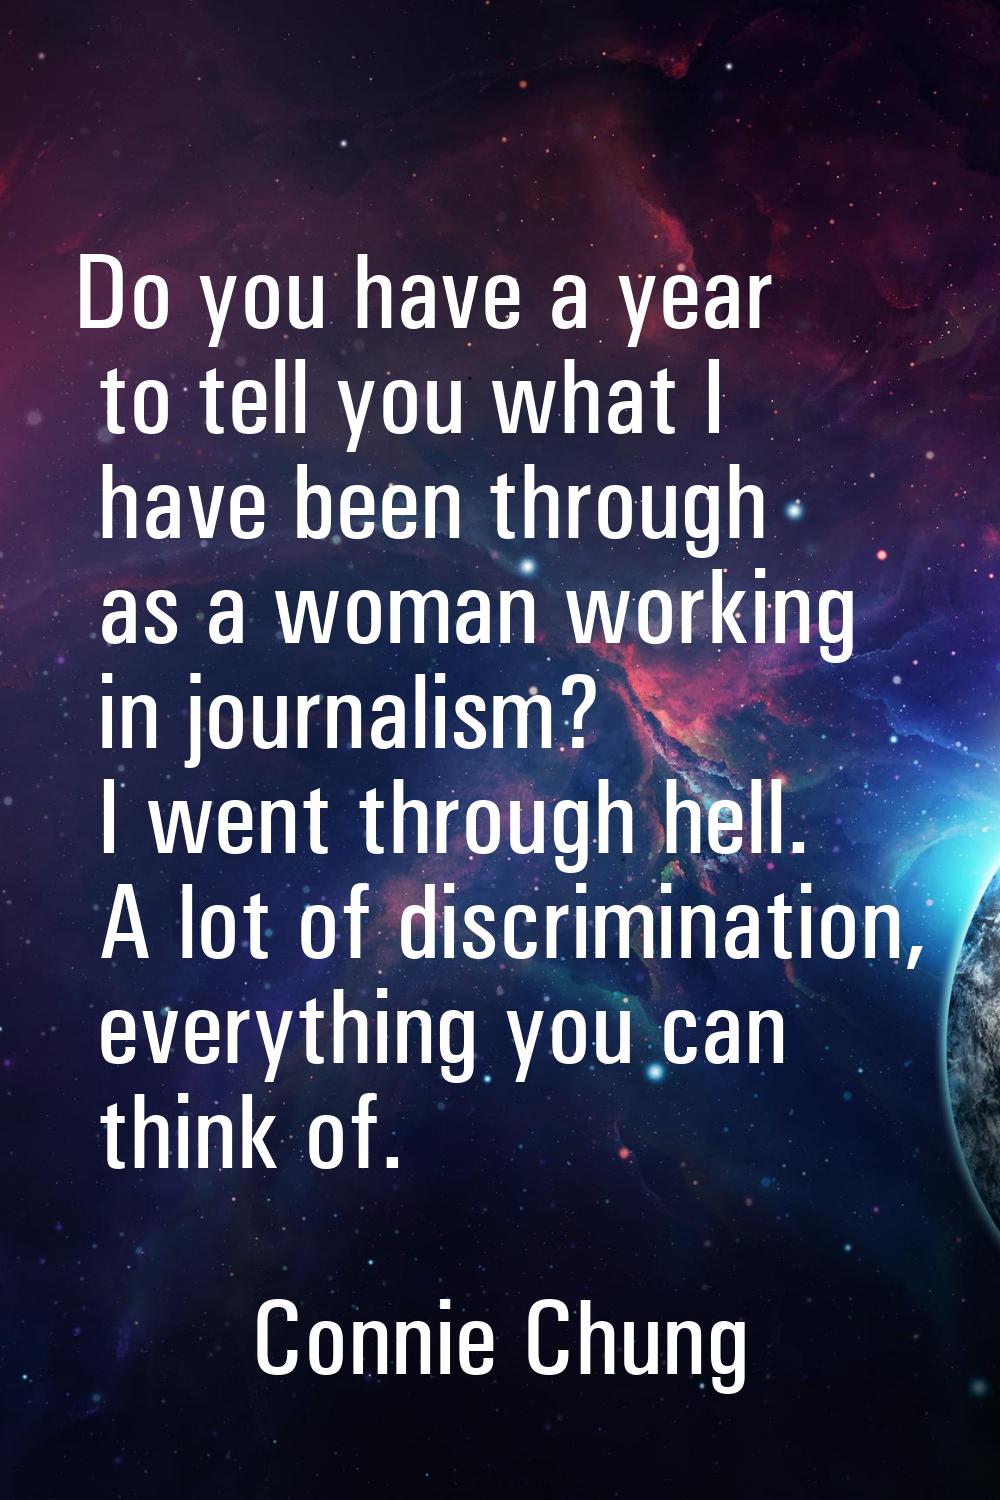 Do you have a year to tell you what I have been through as a woman working in journalism? I went th